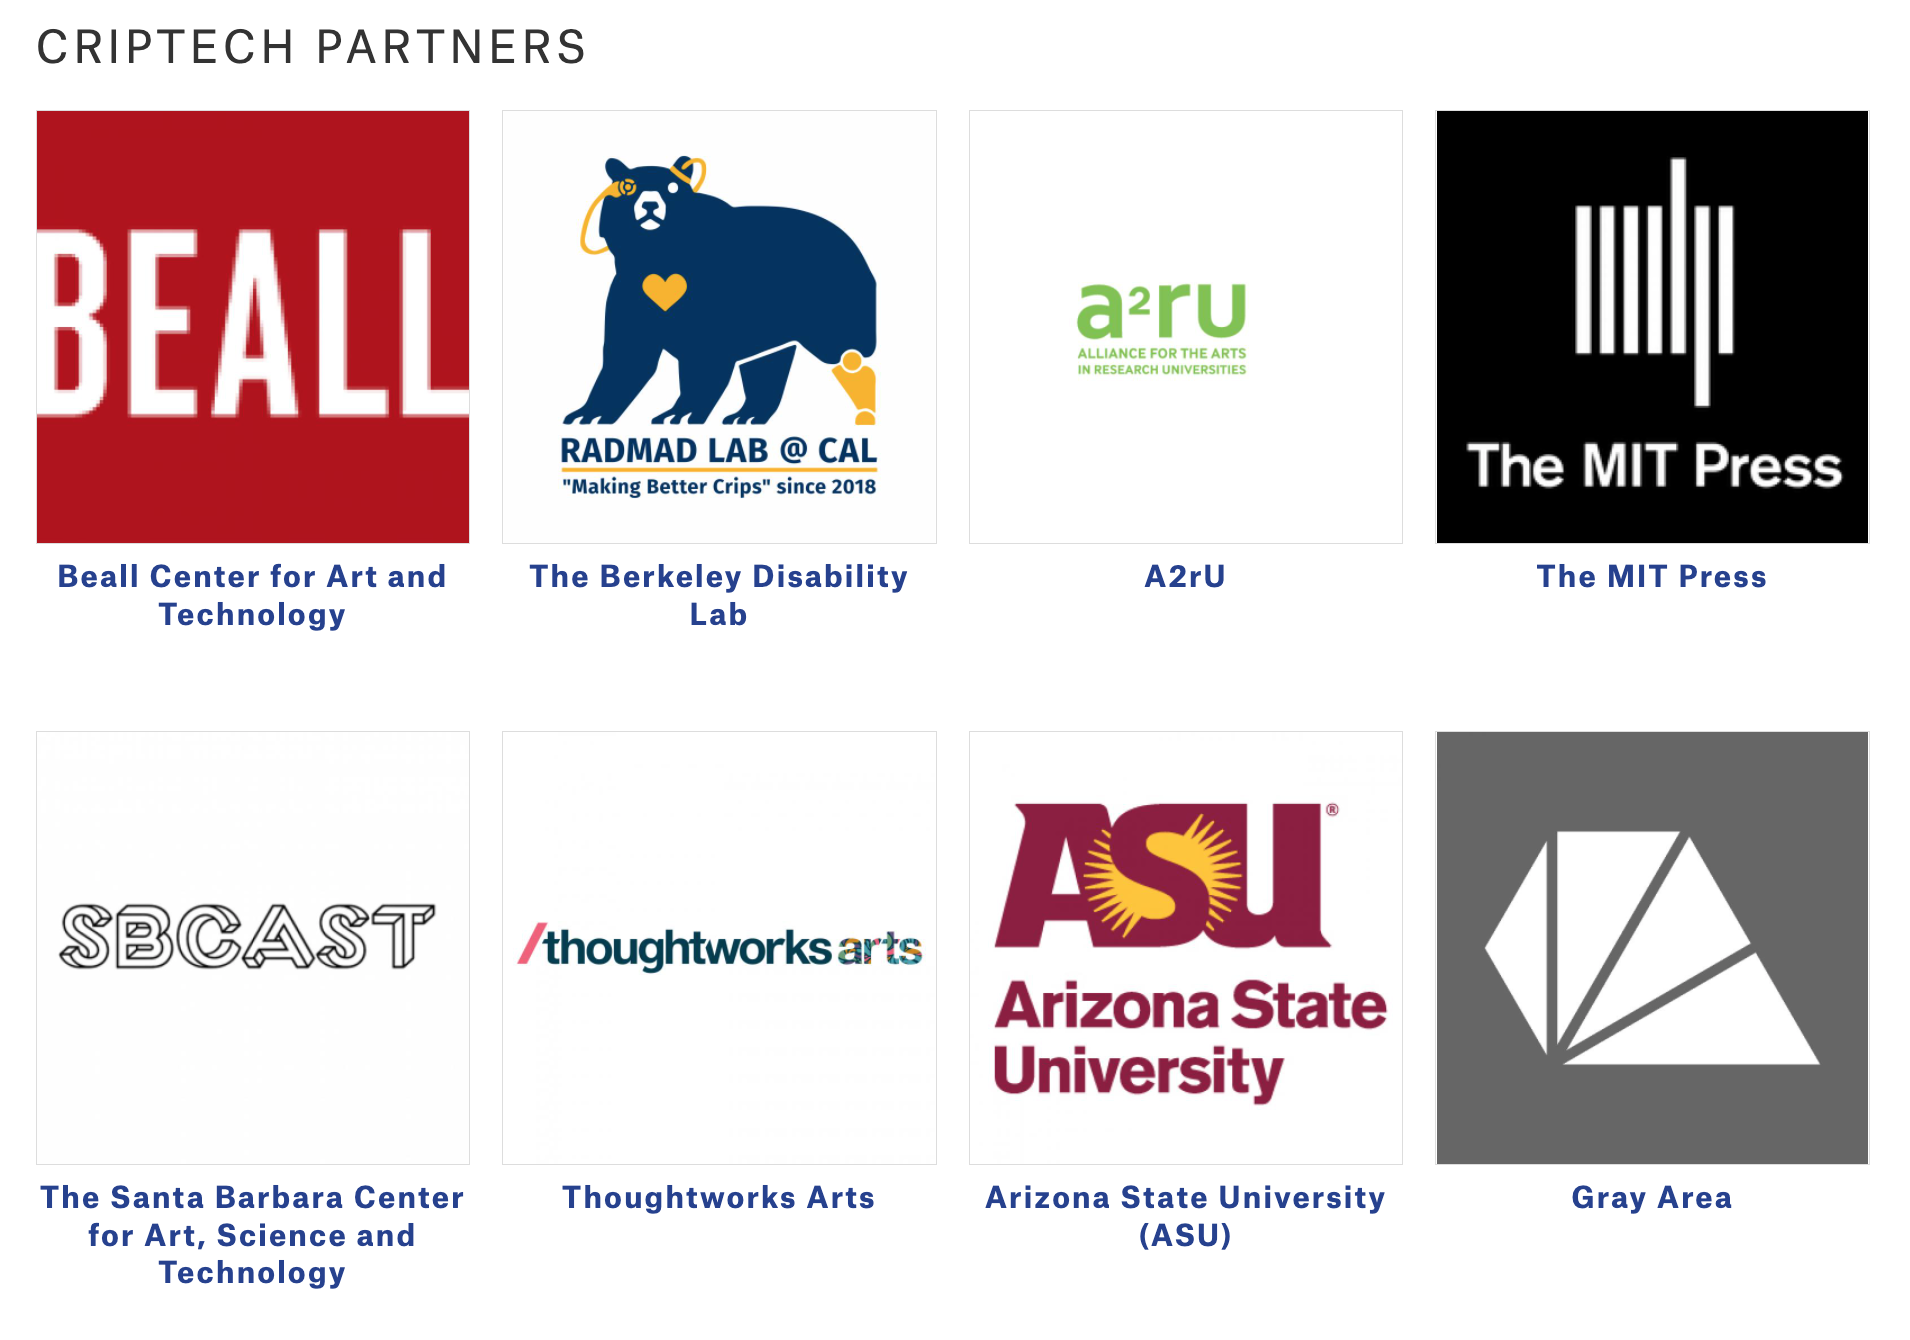 CripTech Partner Logos and stated in partners above